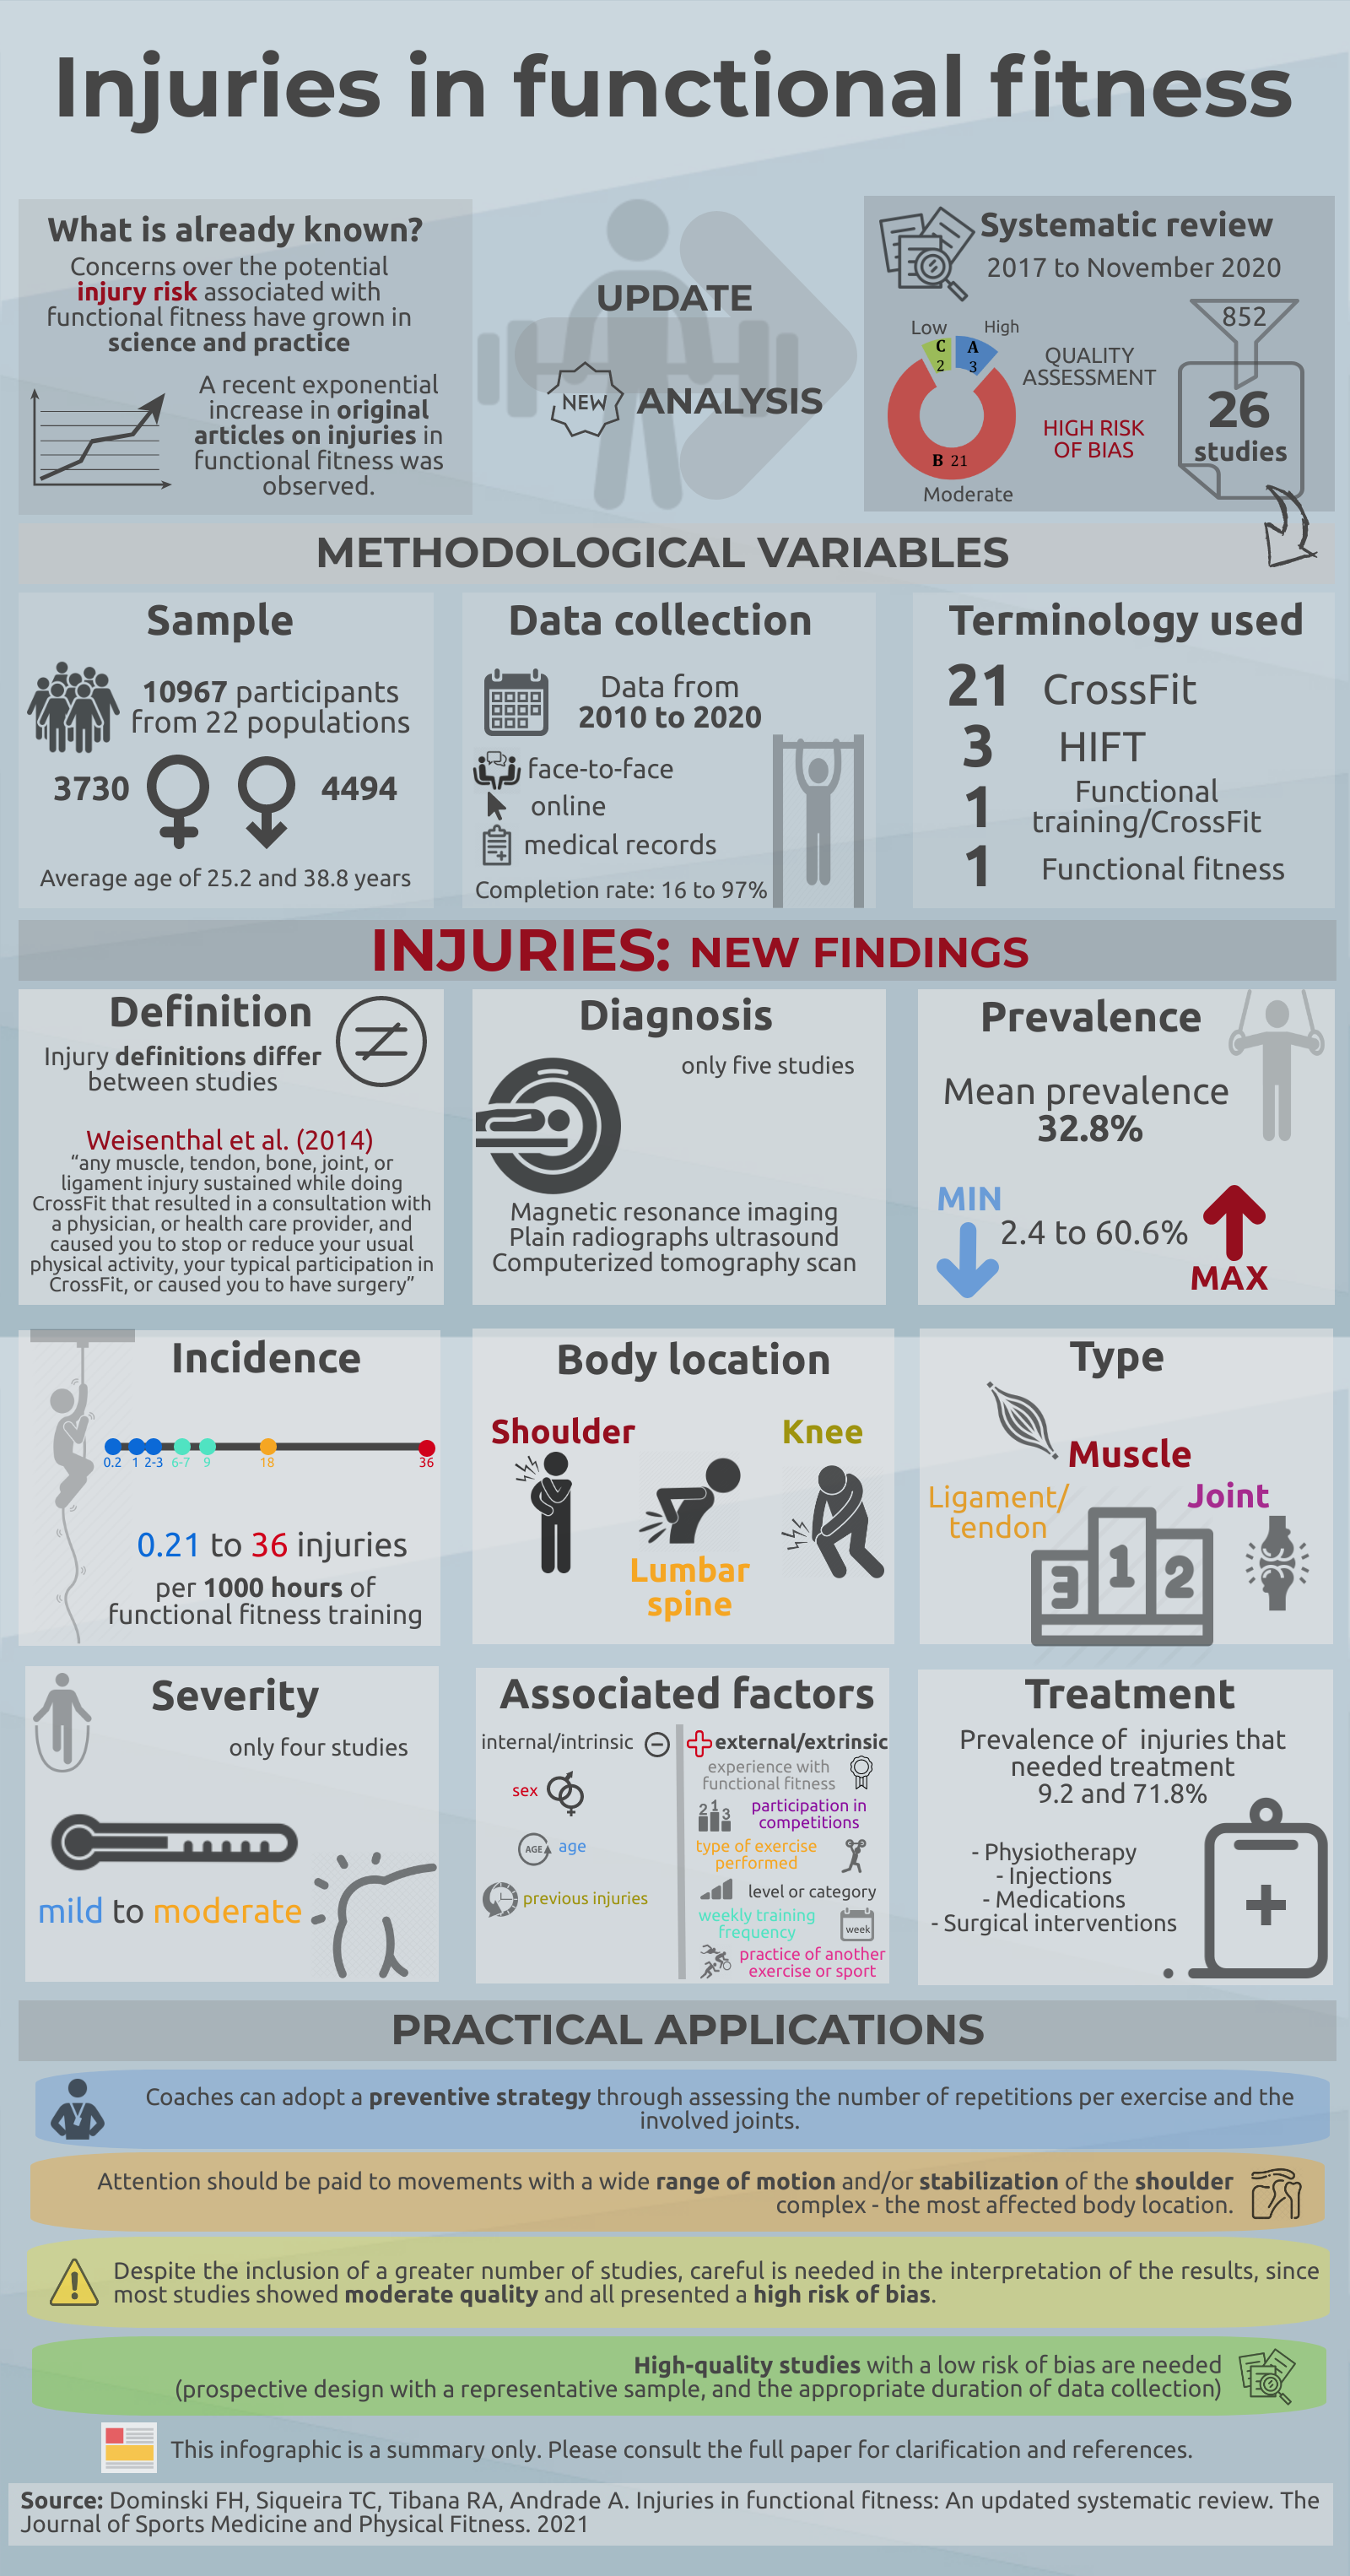 Injuries in functional fitness: An updated systematic review #Infographic